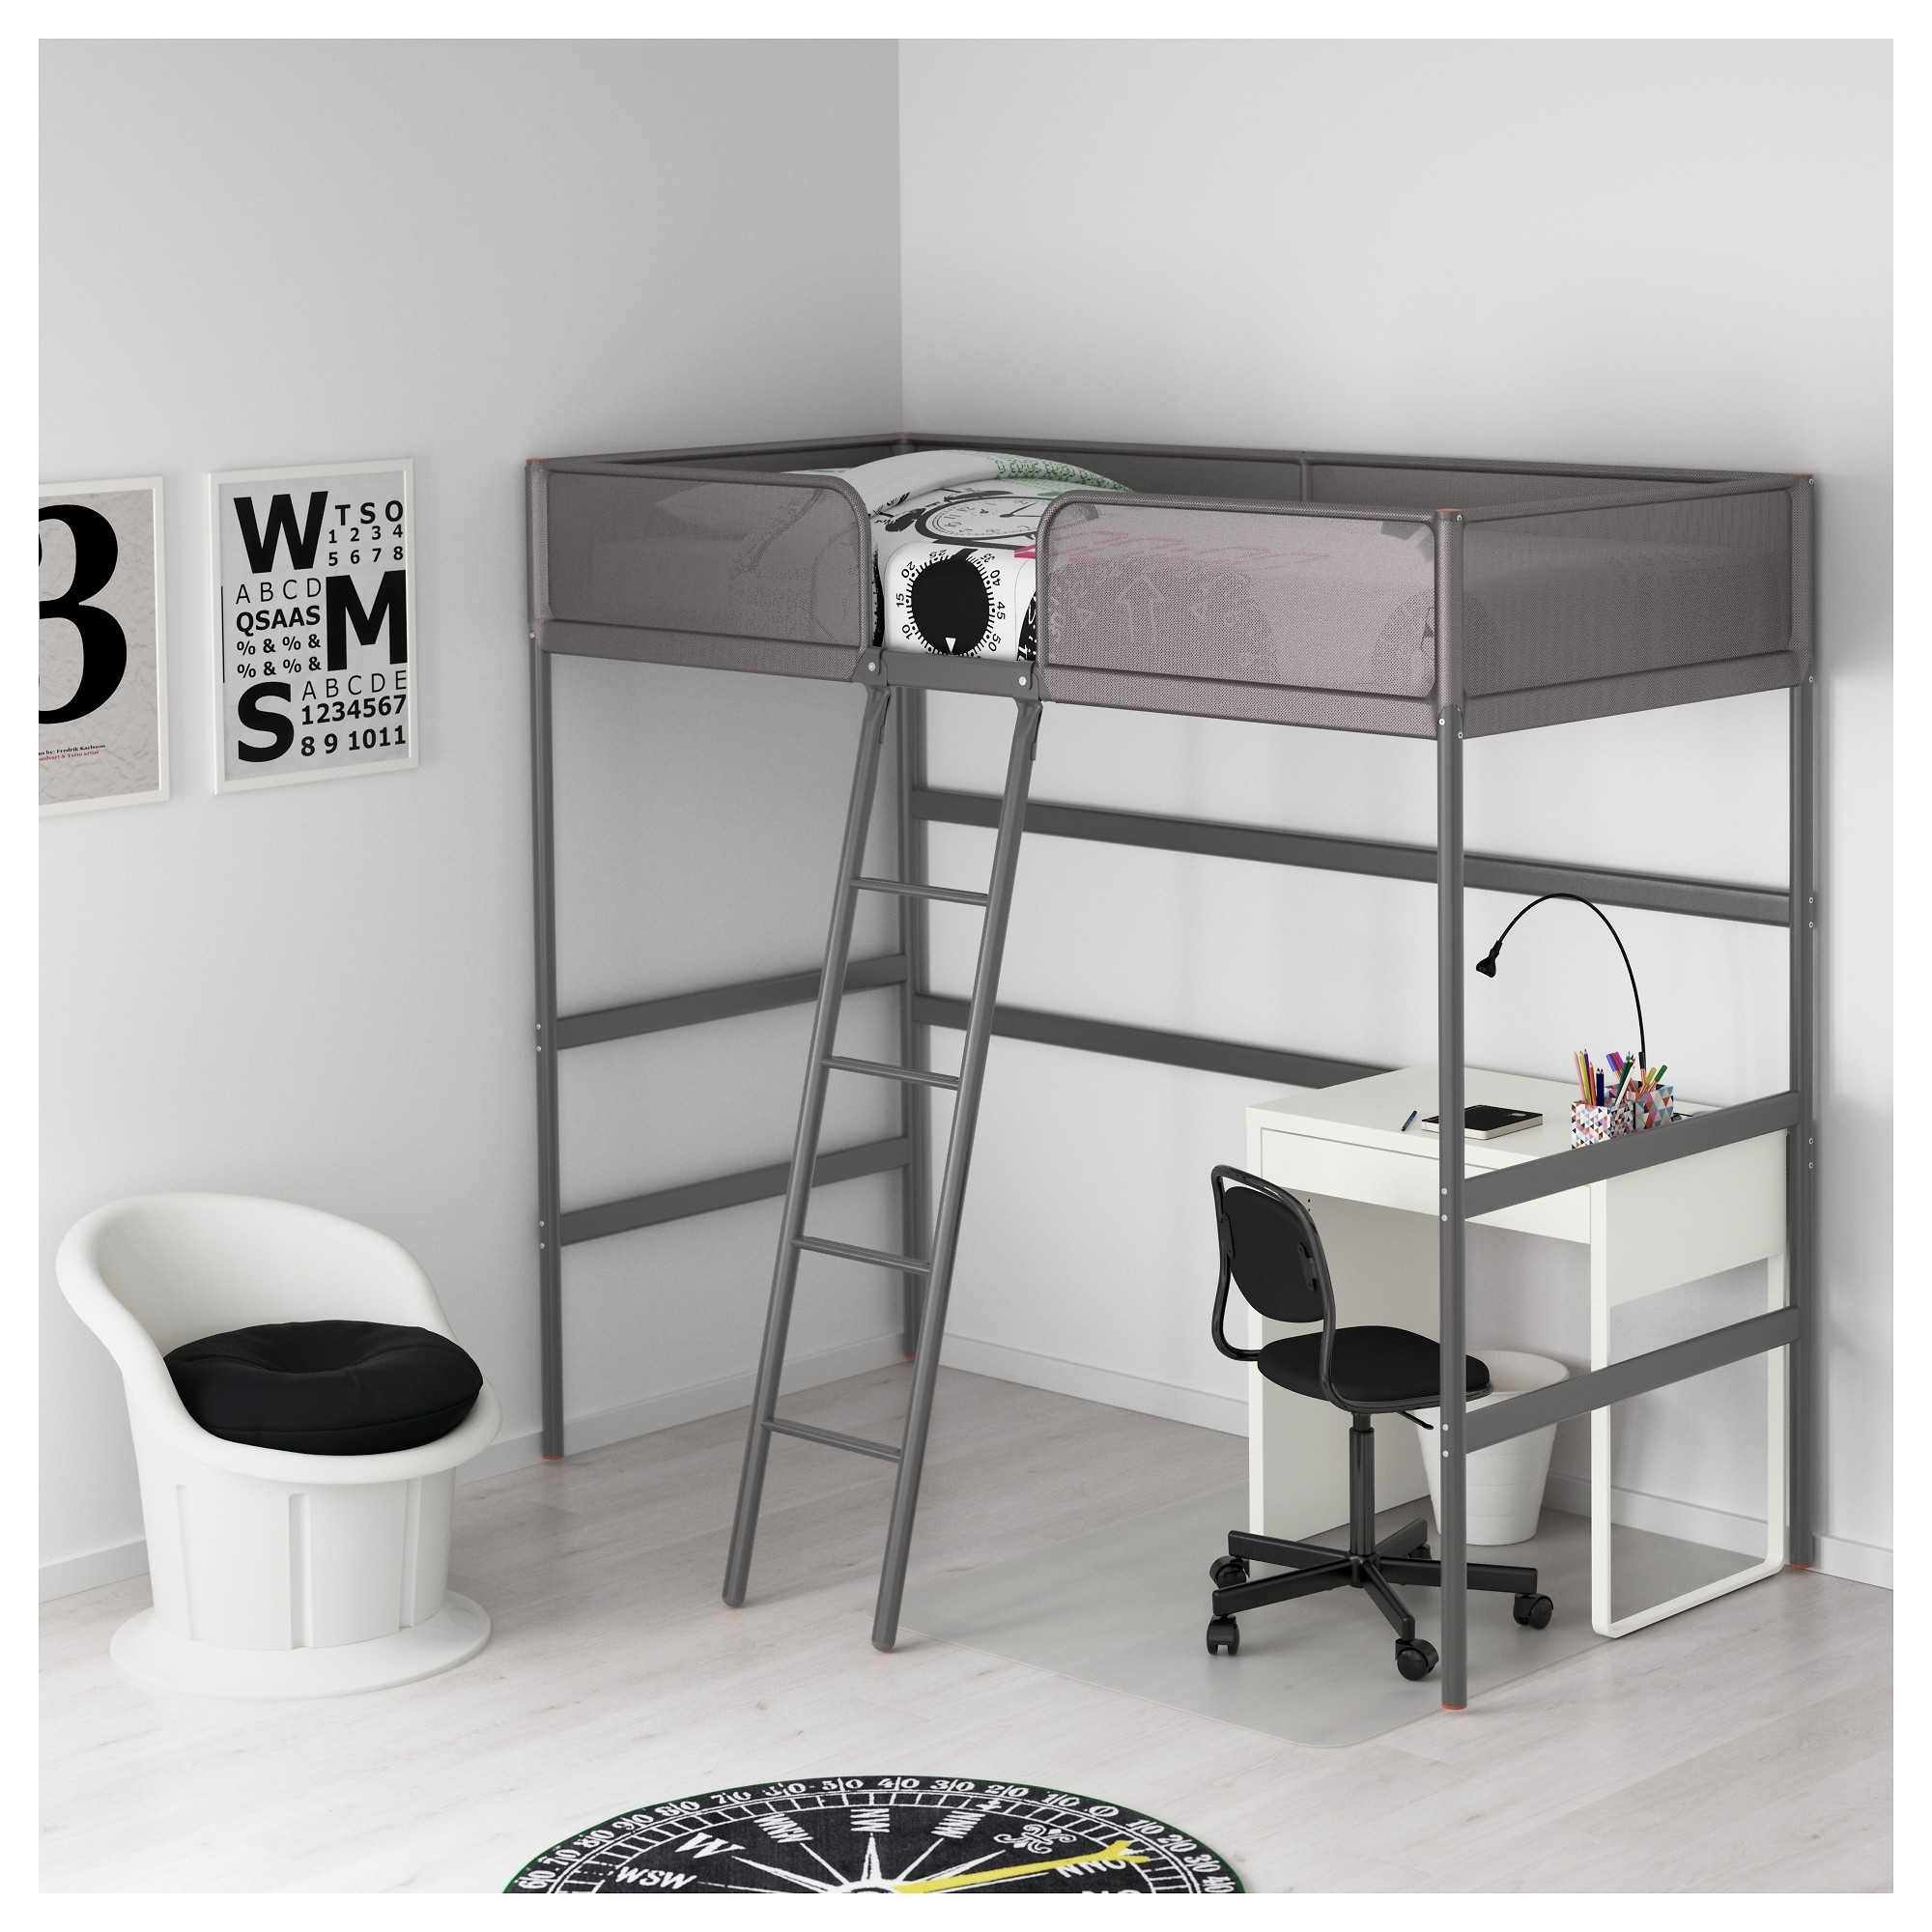 Ikea Loft Beds To Or Not In, Ikea Metal Frame Loft Bed Instructions